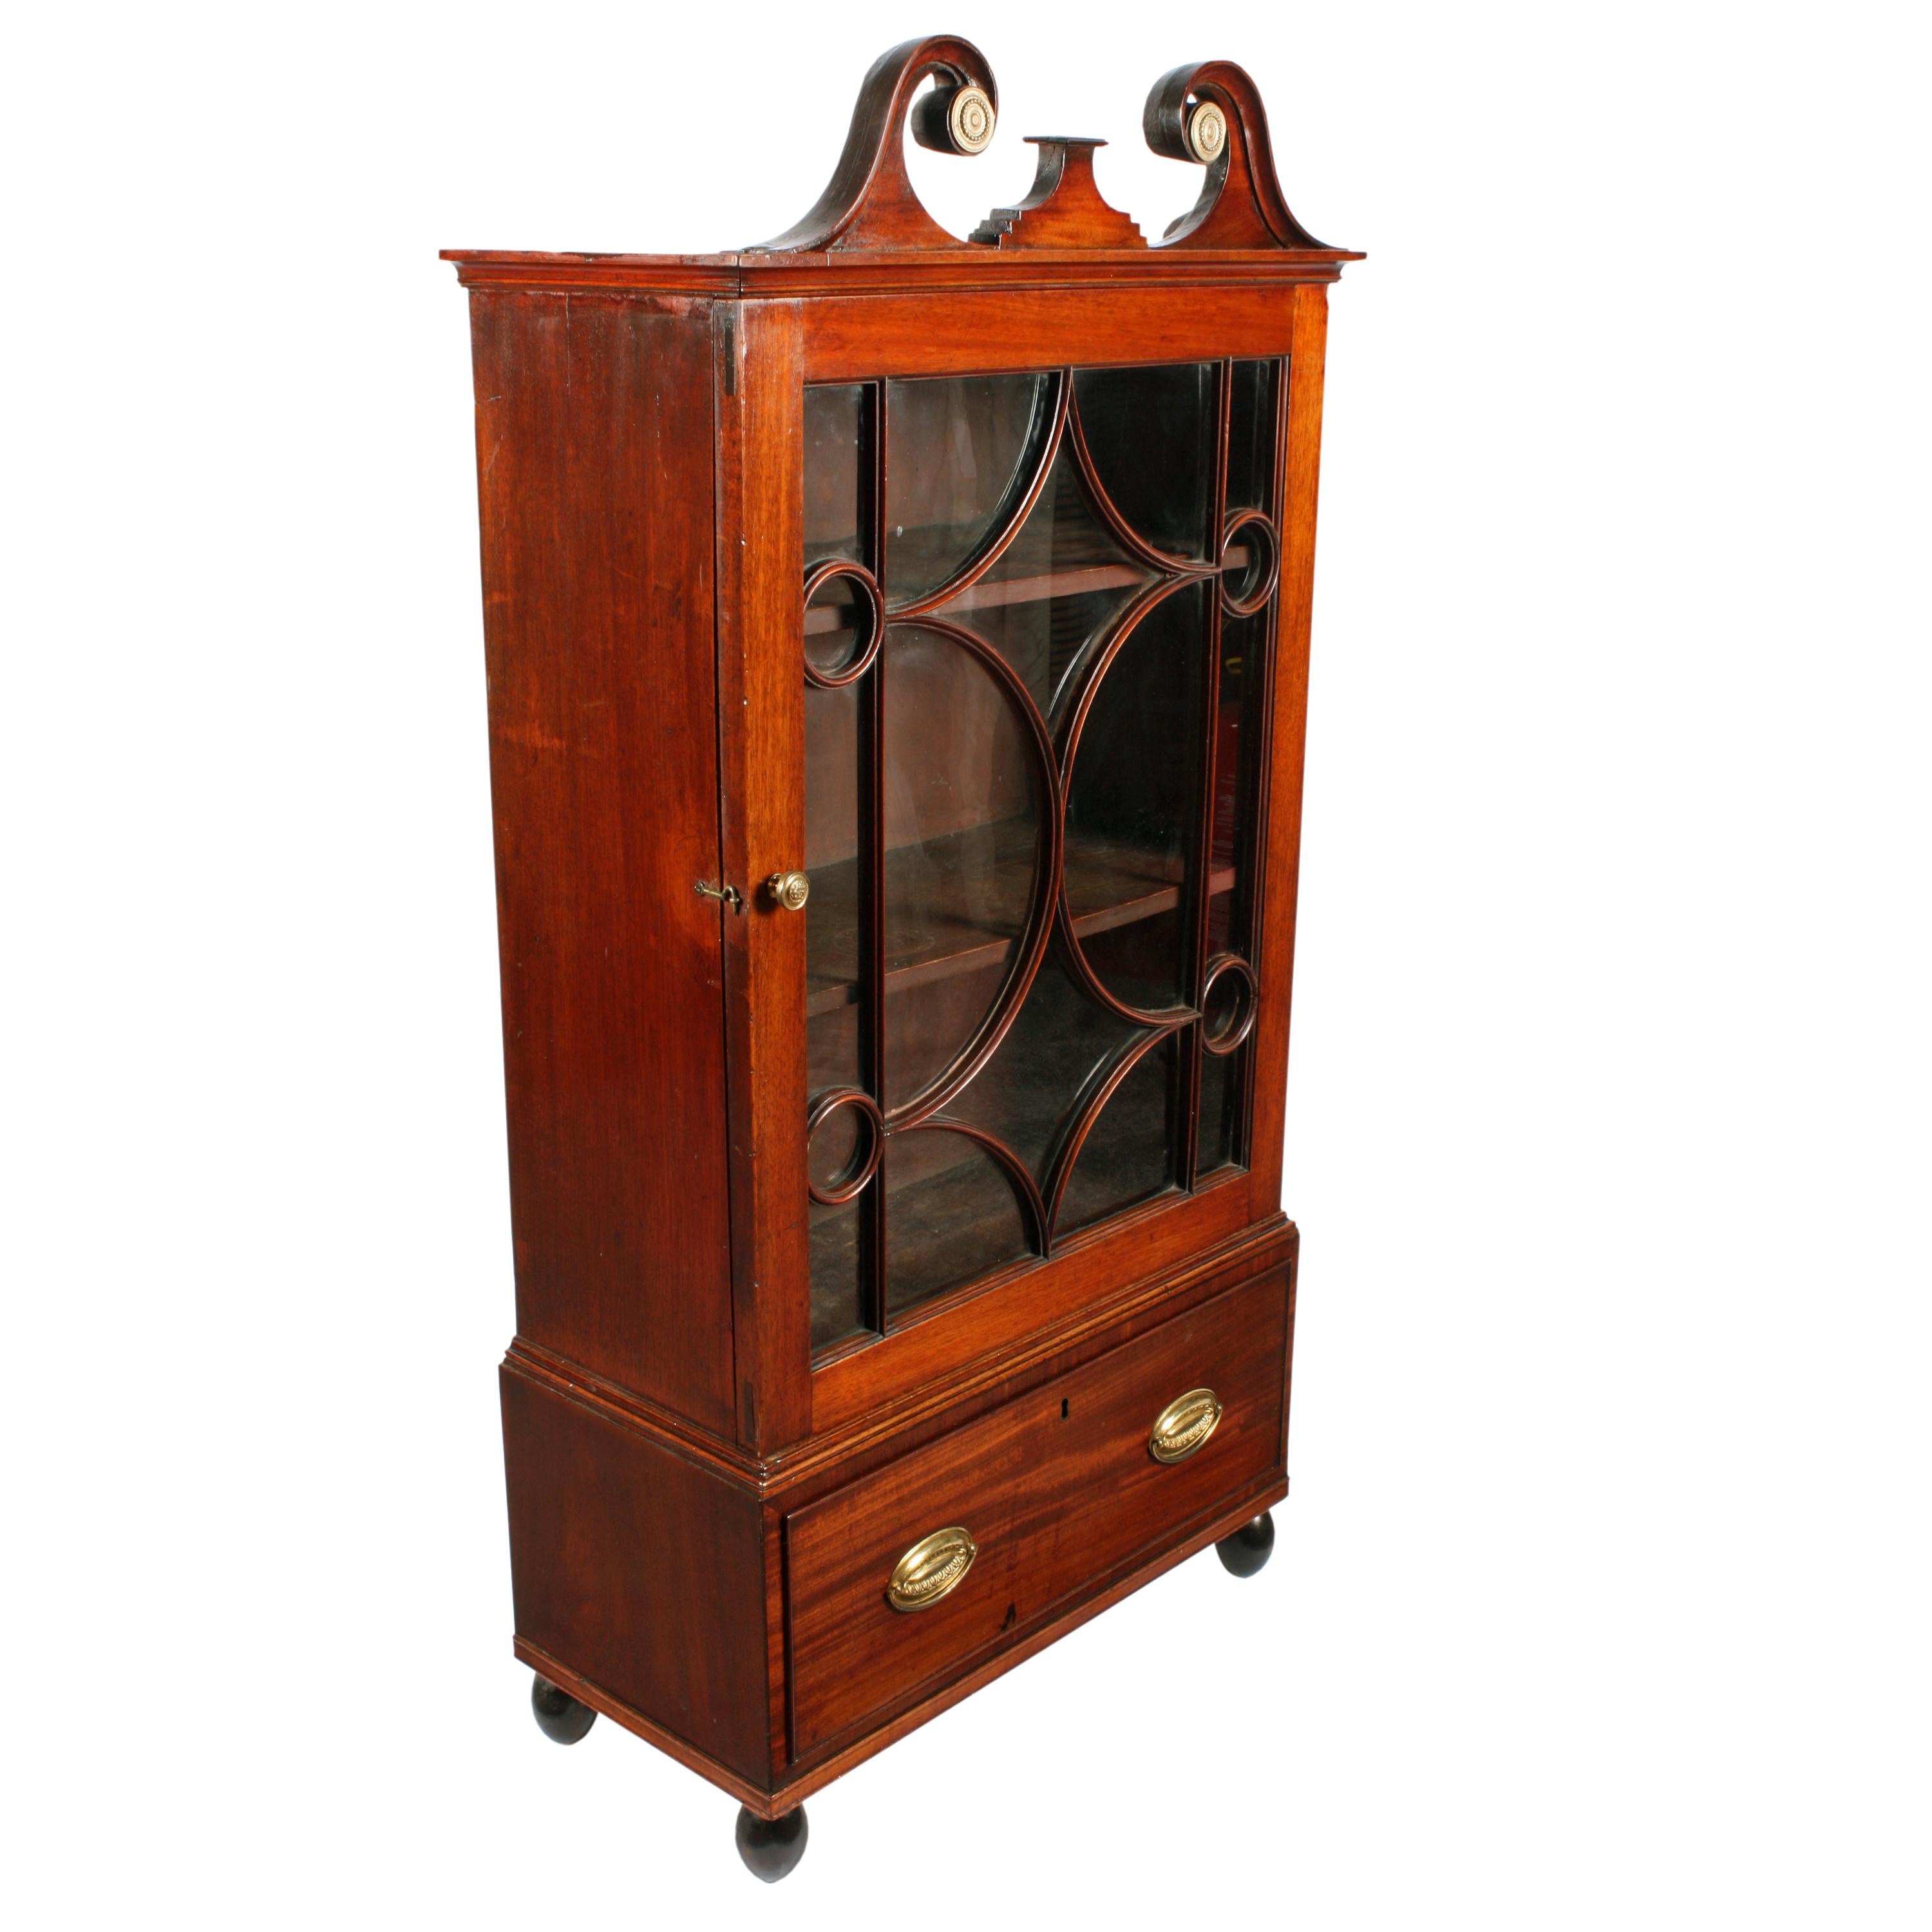 An early 19th century Georgian mahogany dwarf cabinet.

The cabinet is of small proportions with a single glazed door, a drawer, a bold swan neck pediment and stands on turned ball feet.

The door has geometric glazing with eighteen panes of